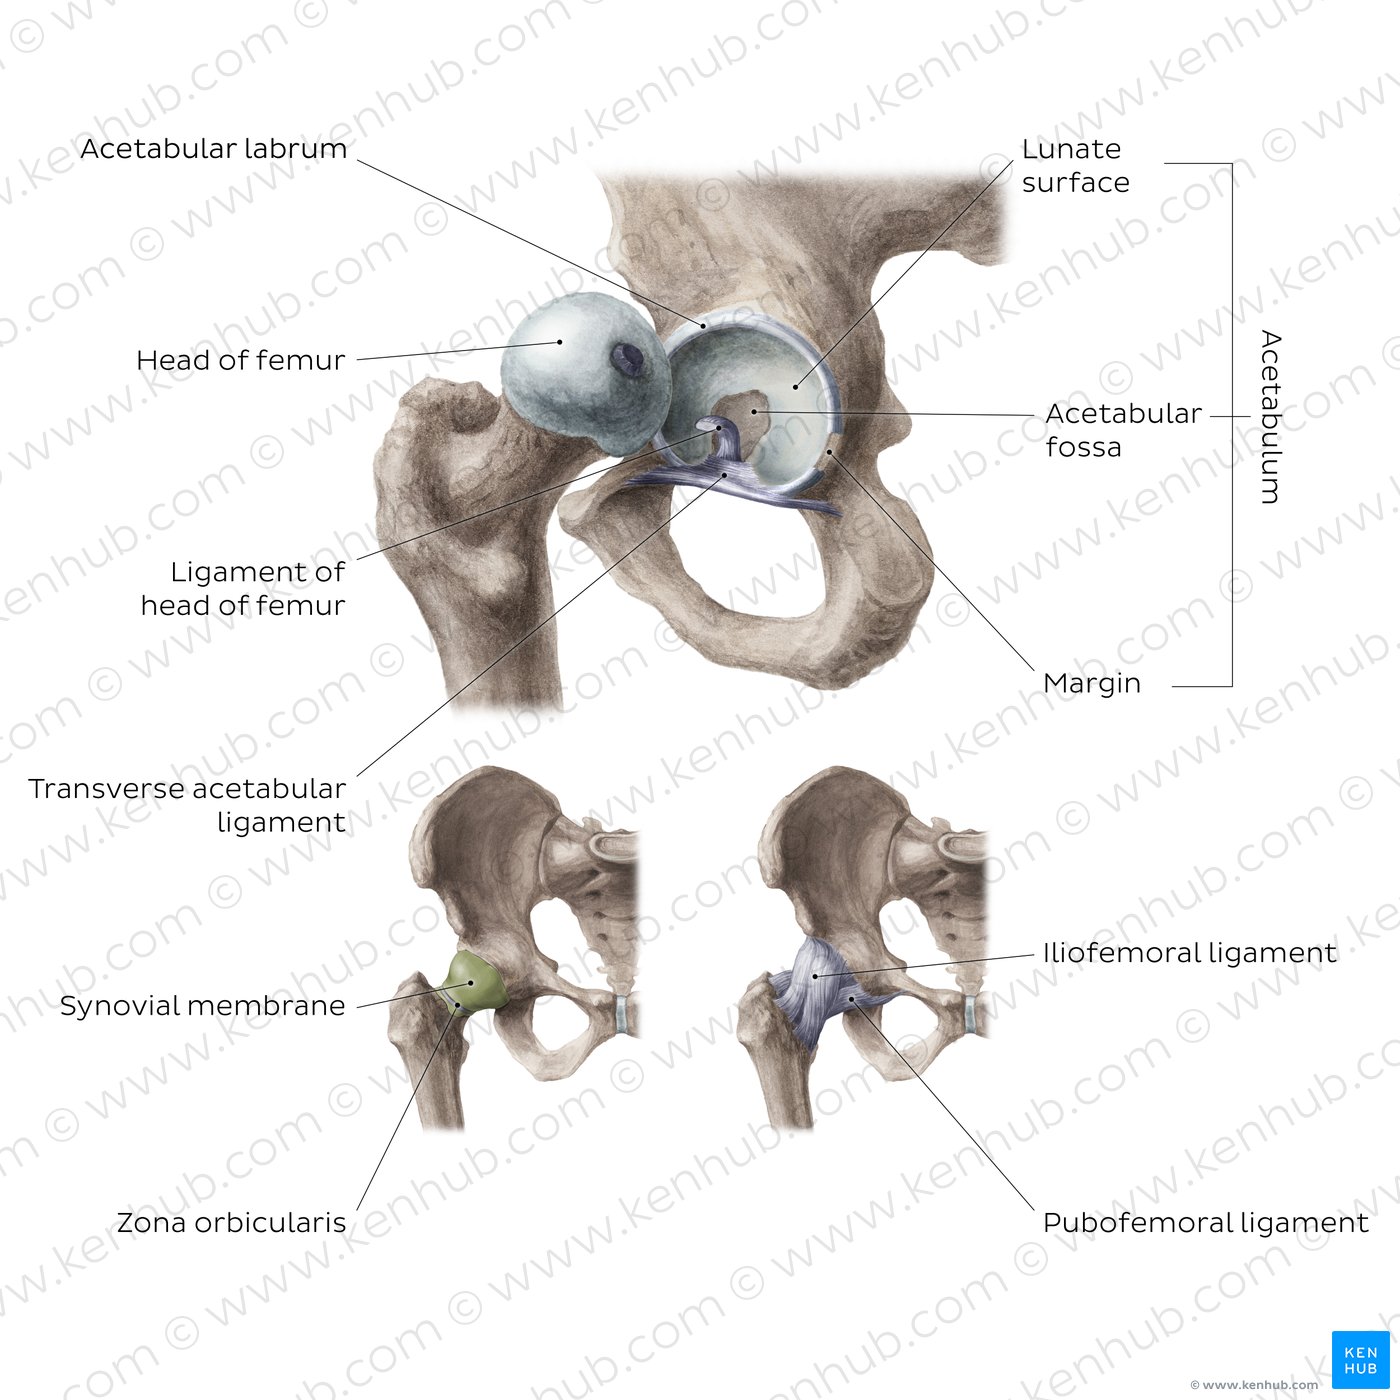 Anatomy of the hip joint (diagram)